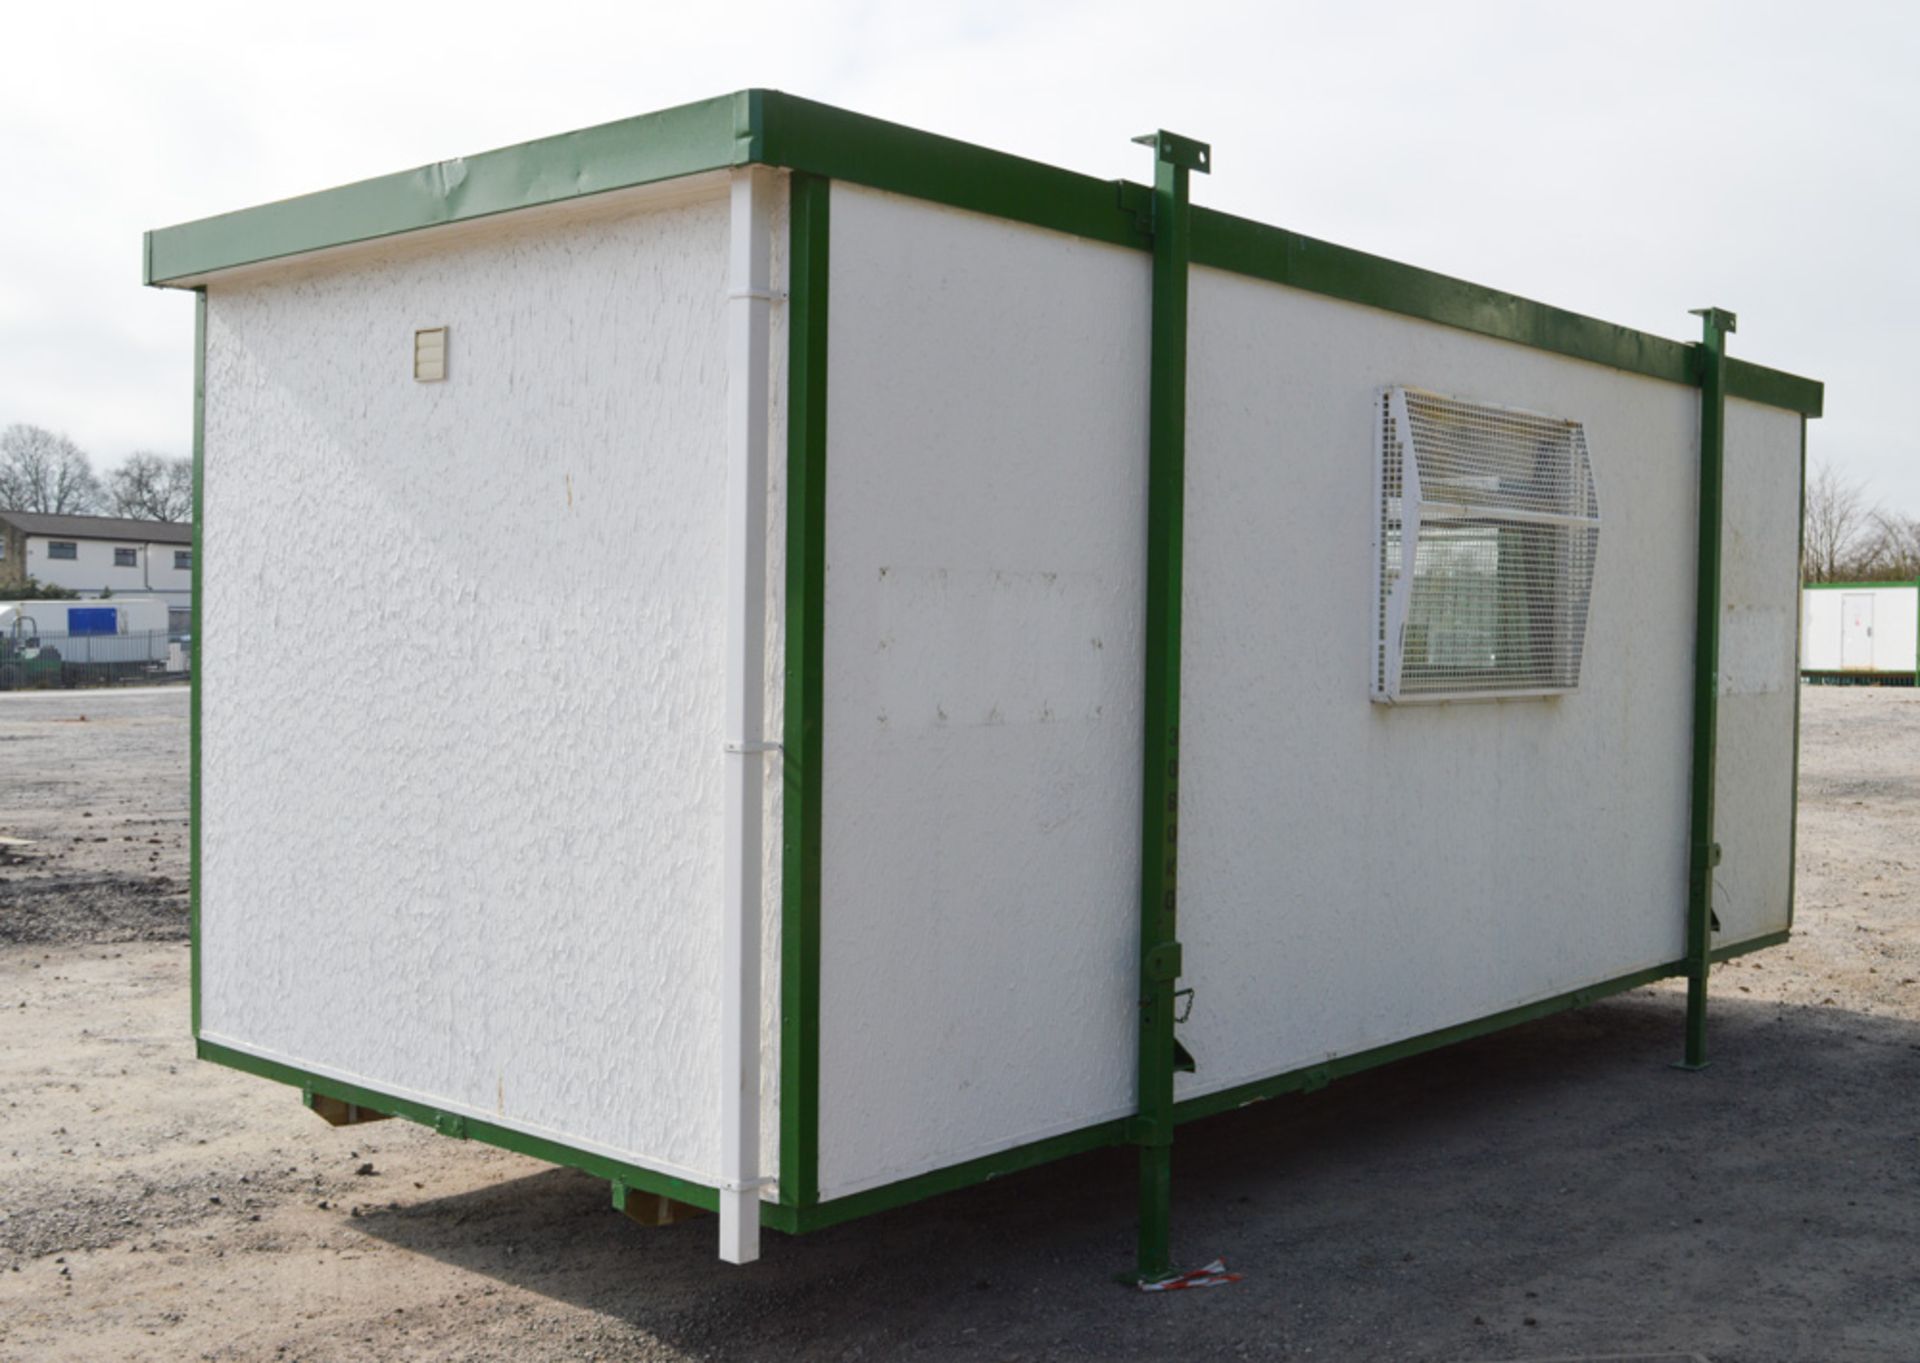 21 ft x 9 ft timber jack leg canteen unit comprising of 2 rooms (Canteen area & cloakroom) c/w keys - Image 3 of 6